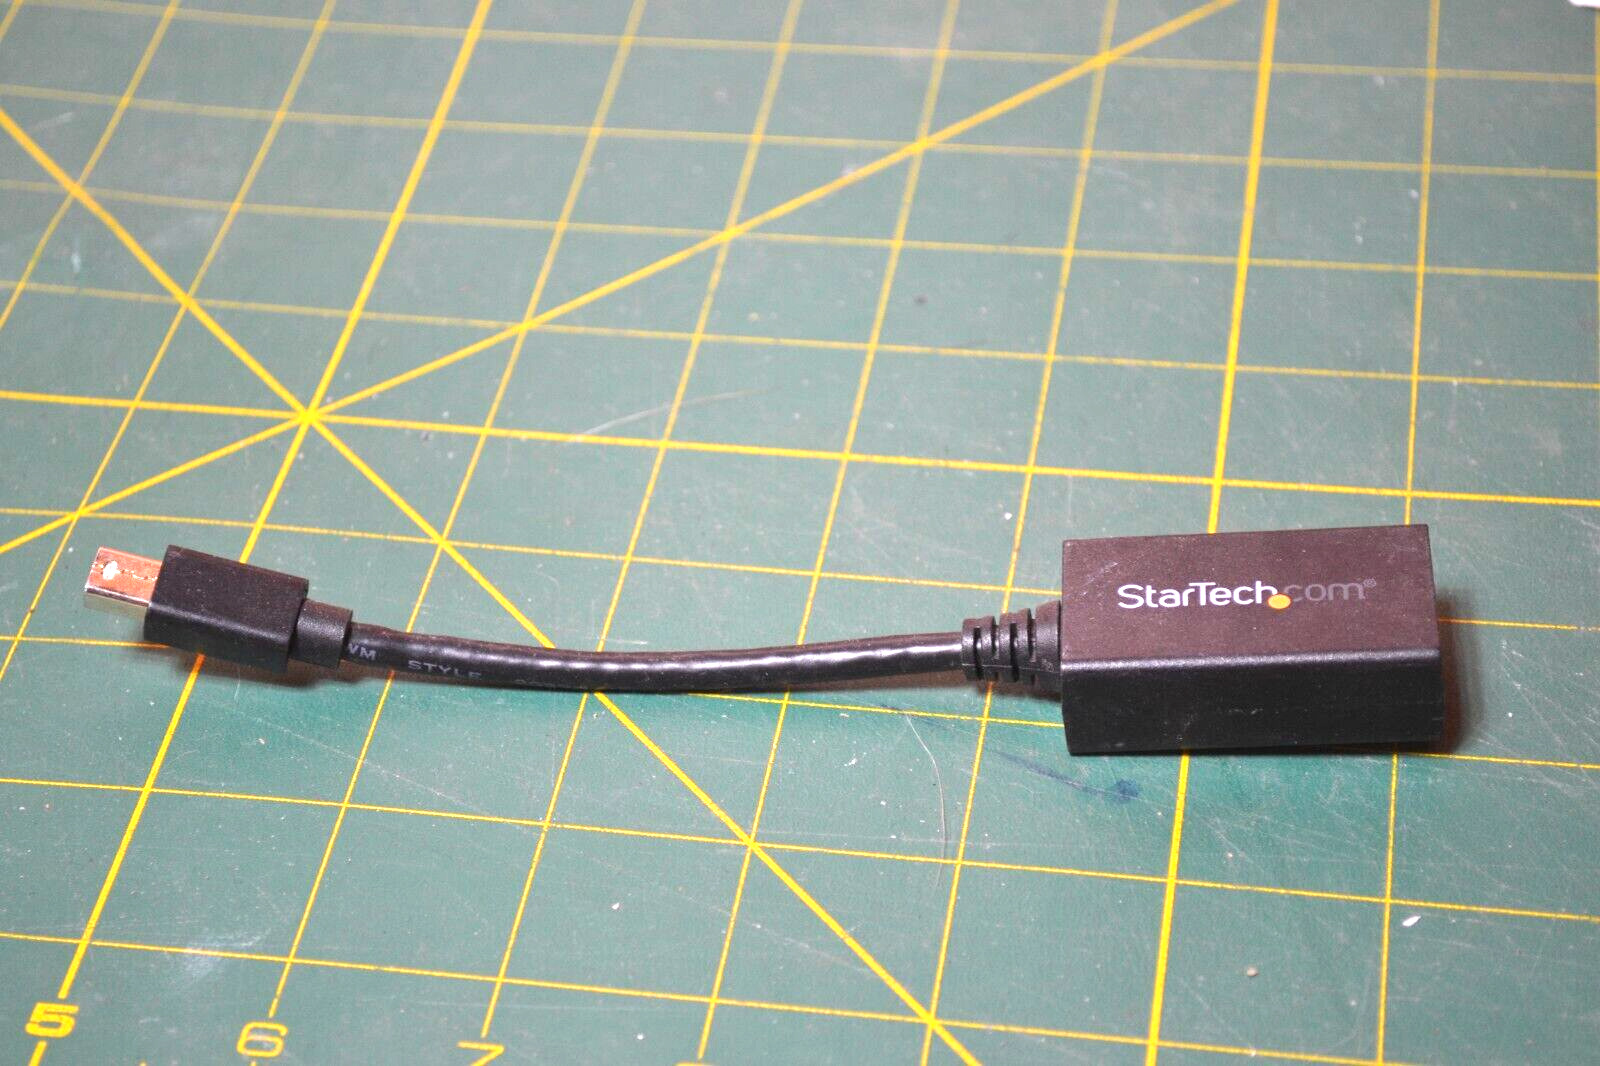 Used Startech.com Mini Display Port to HDMI adapter, model MDP2HDMI